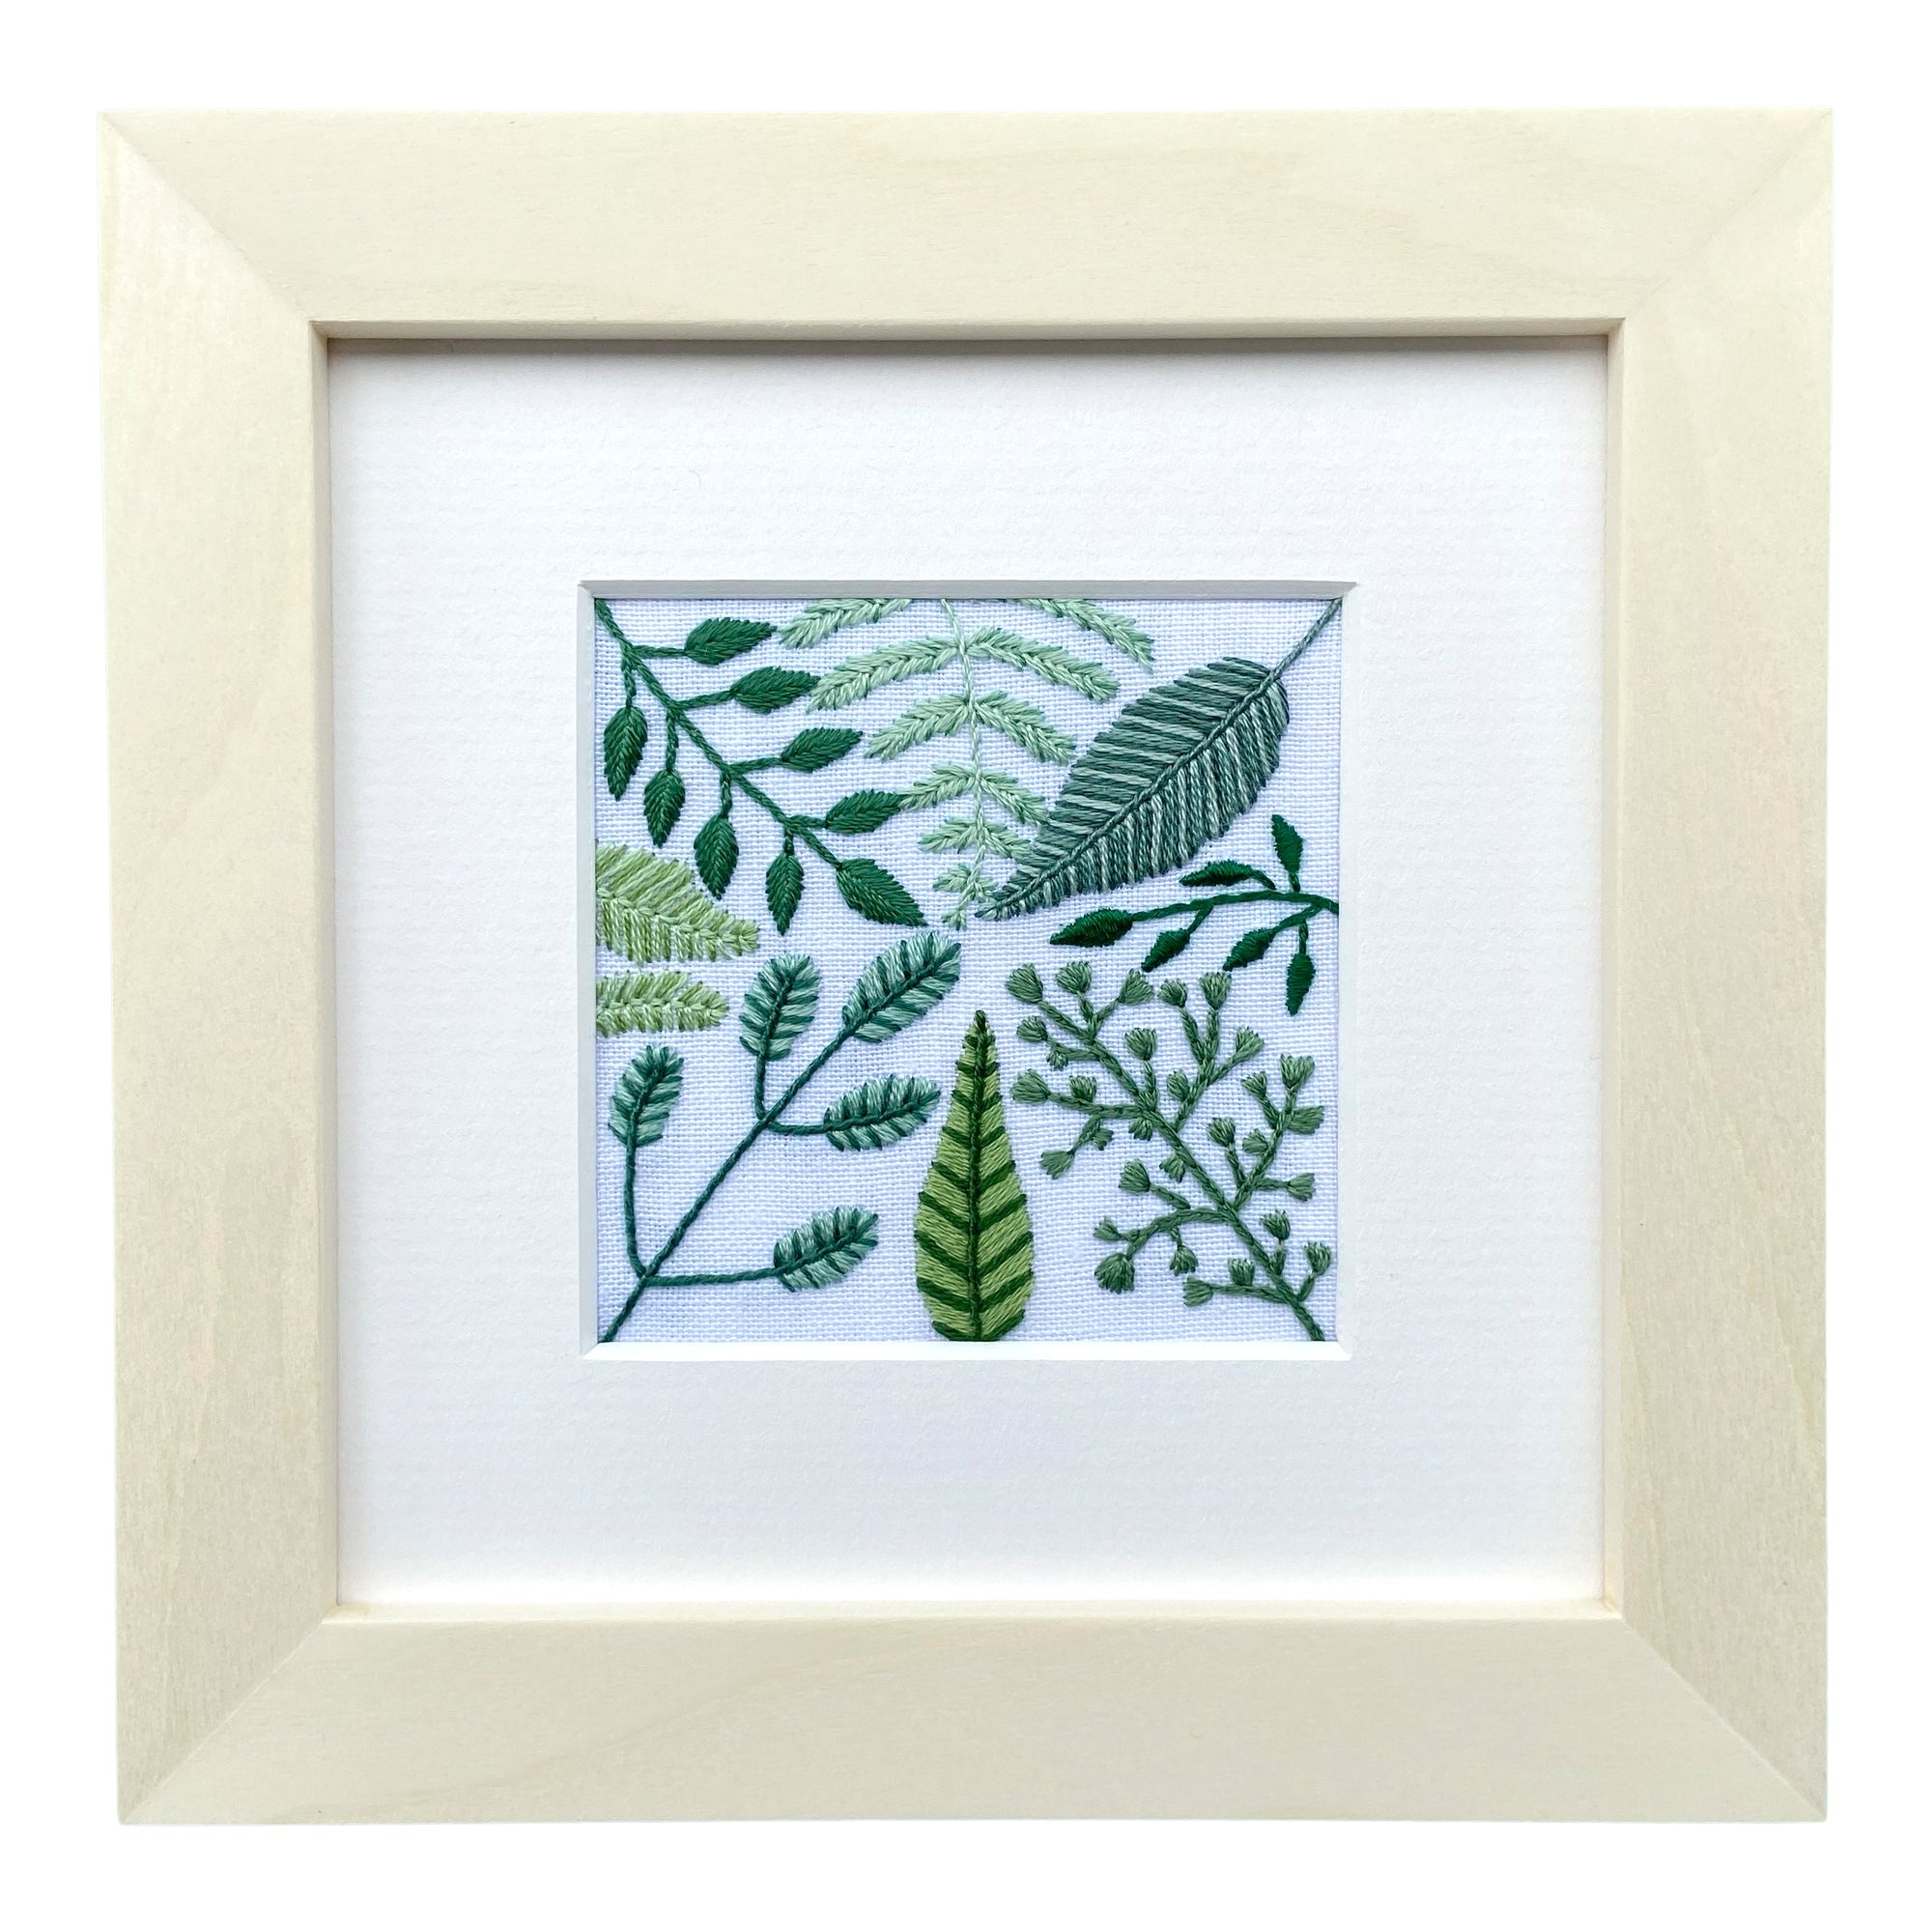 Leaves and Vines 1 (2.75") on White Linen Hand Embroidered Art